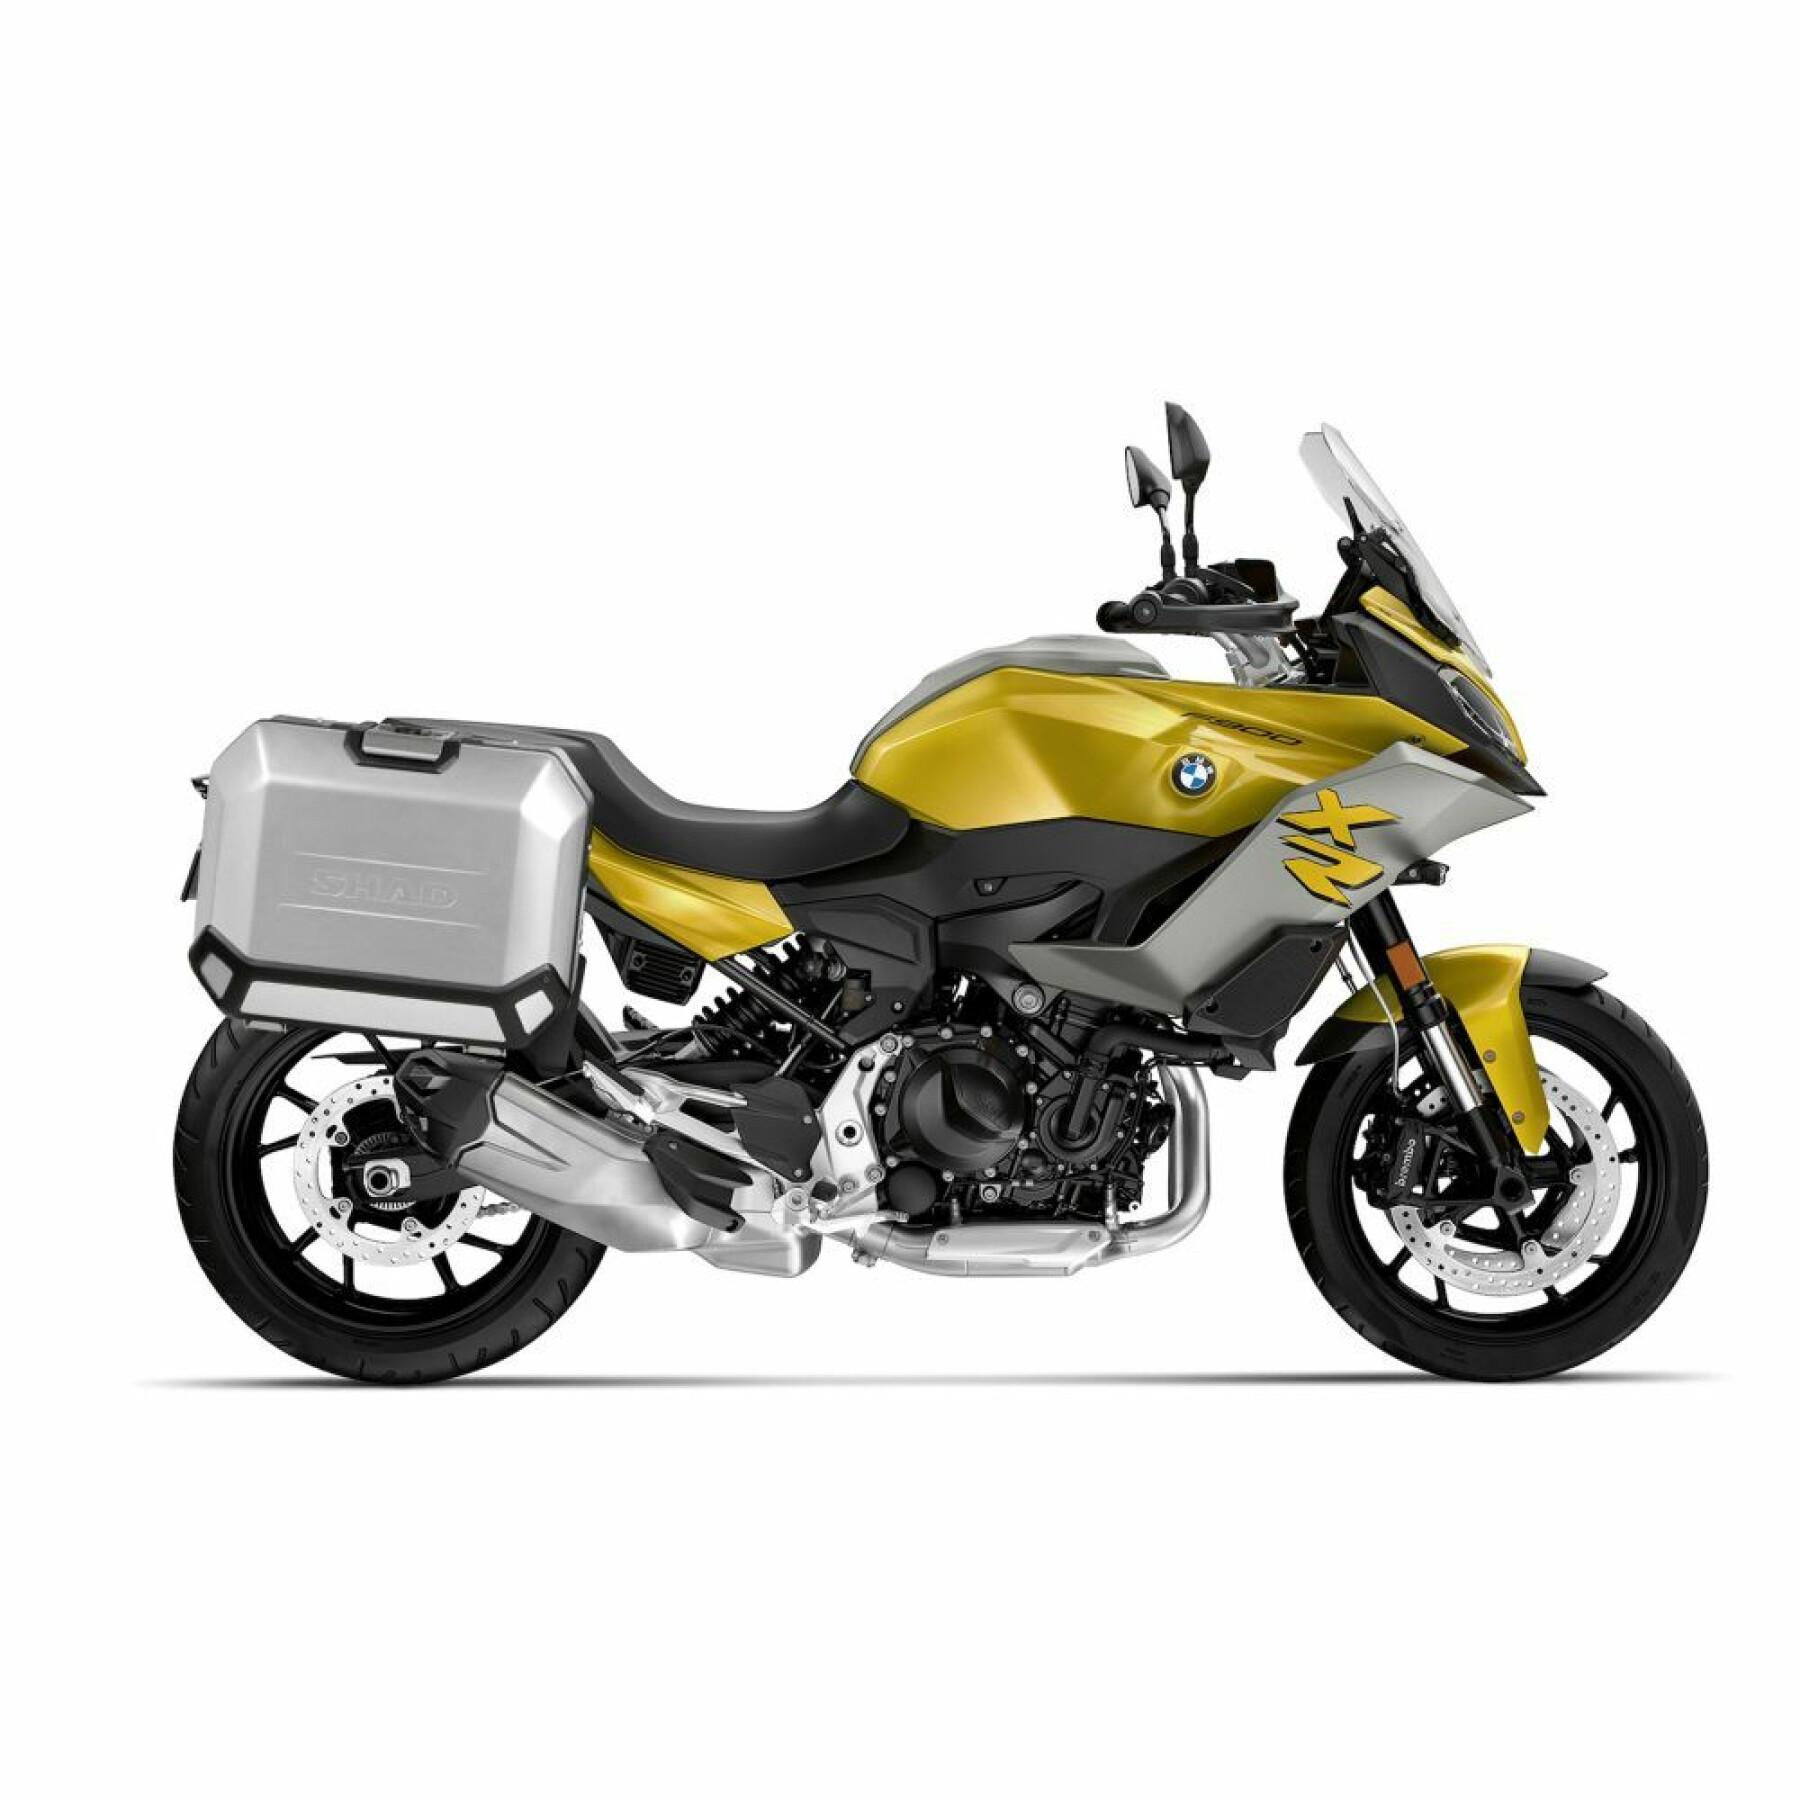 Support valises latérales Shad 4P System Bmw F900R/Xr